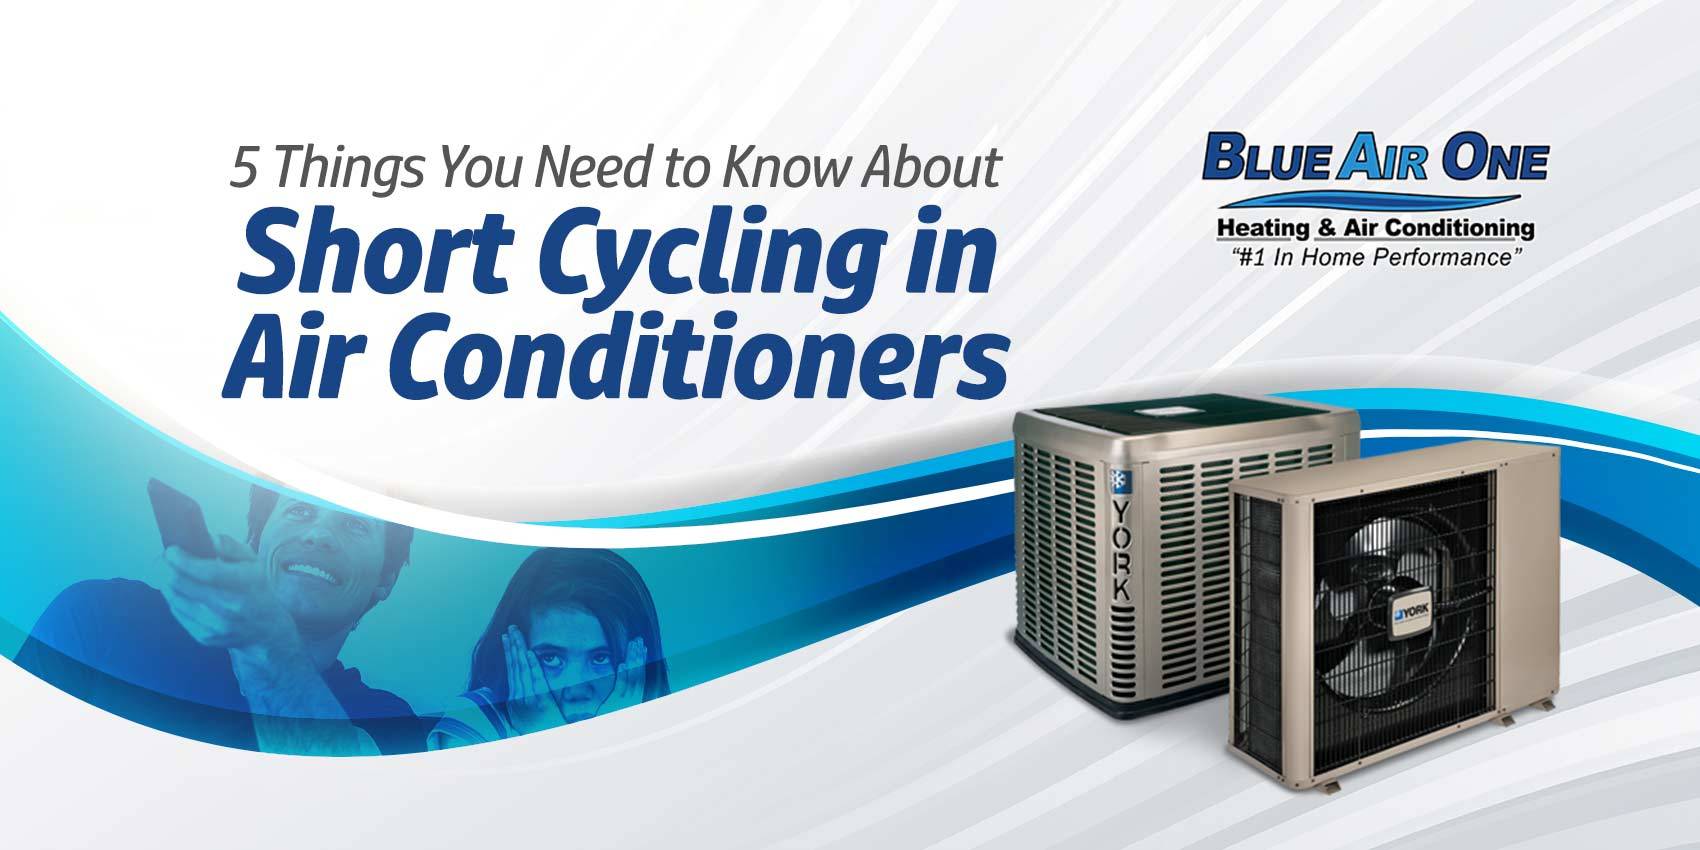 5 Things You Need to Know About Short Cycling in Air Conditioners